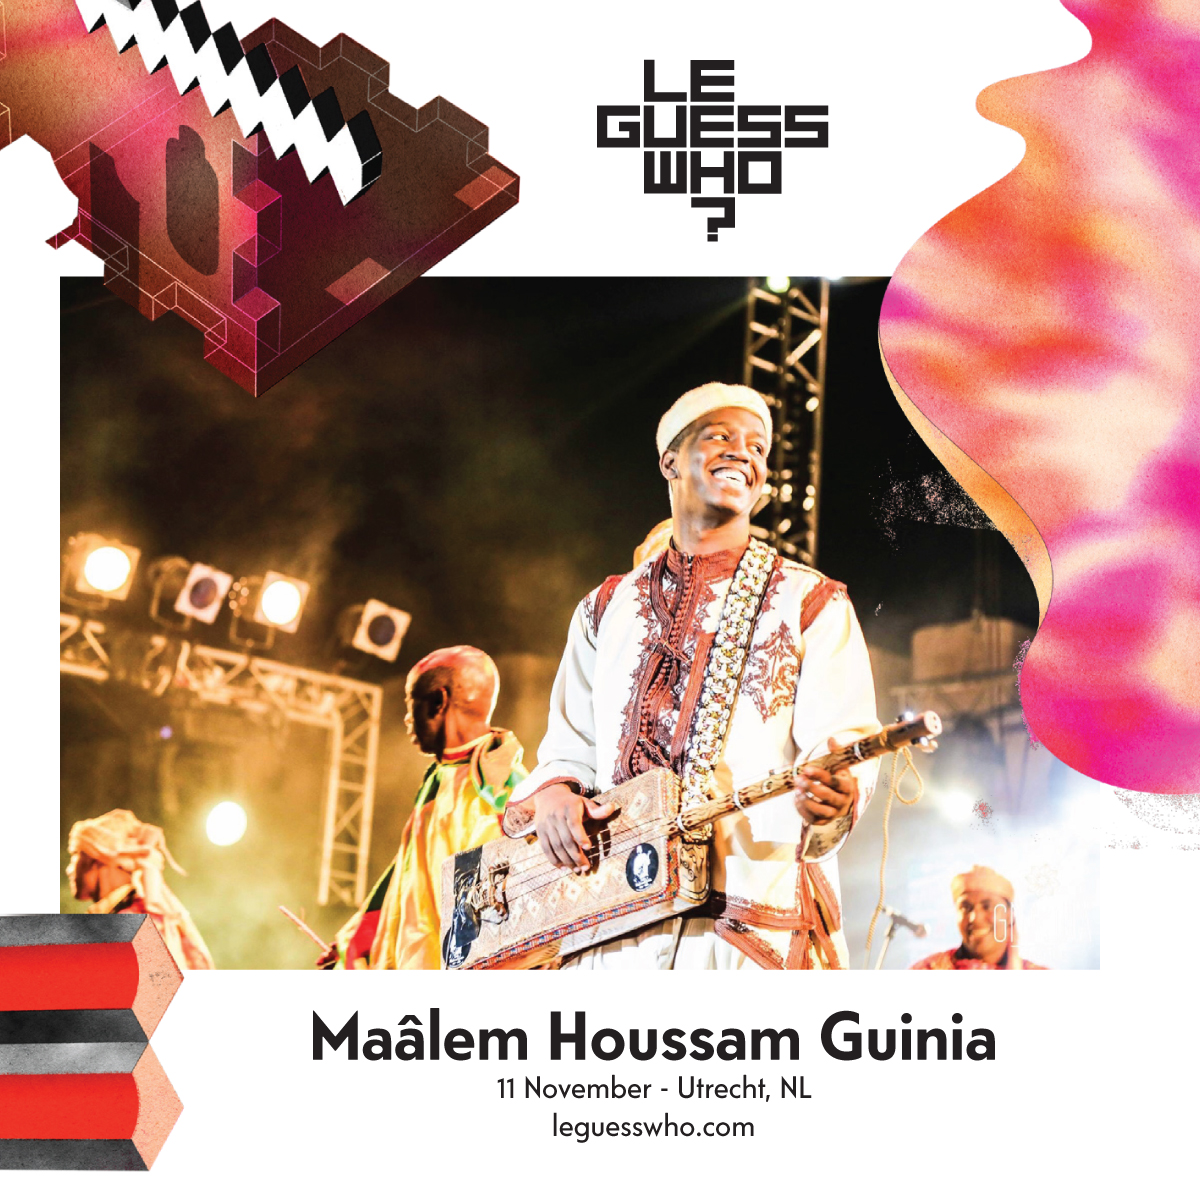 Meet Moroccan Gnawa master Maâlem Houssam Guinia, curated by James Holden for LGW17